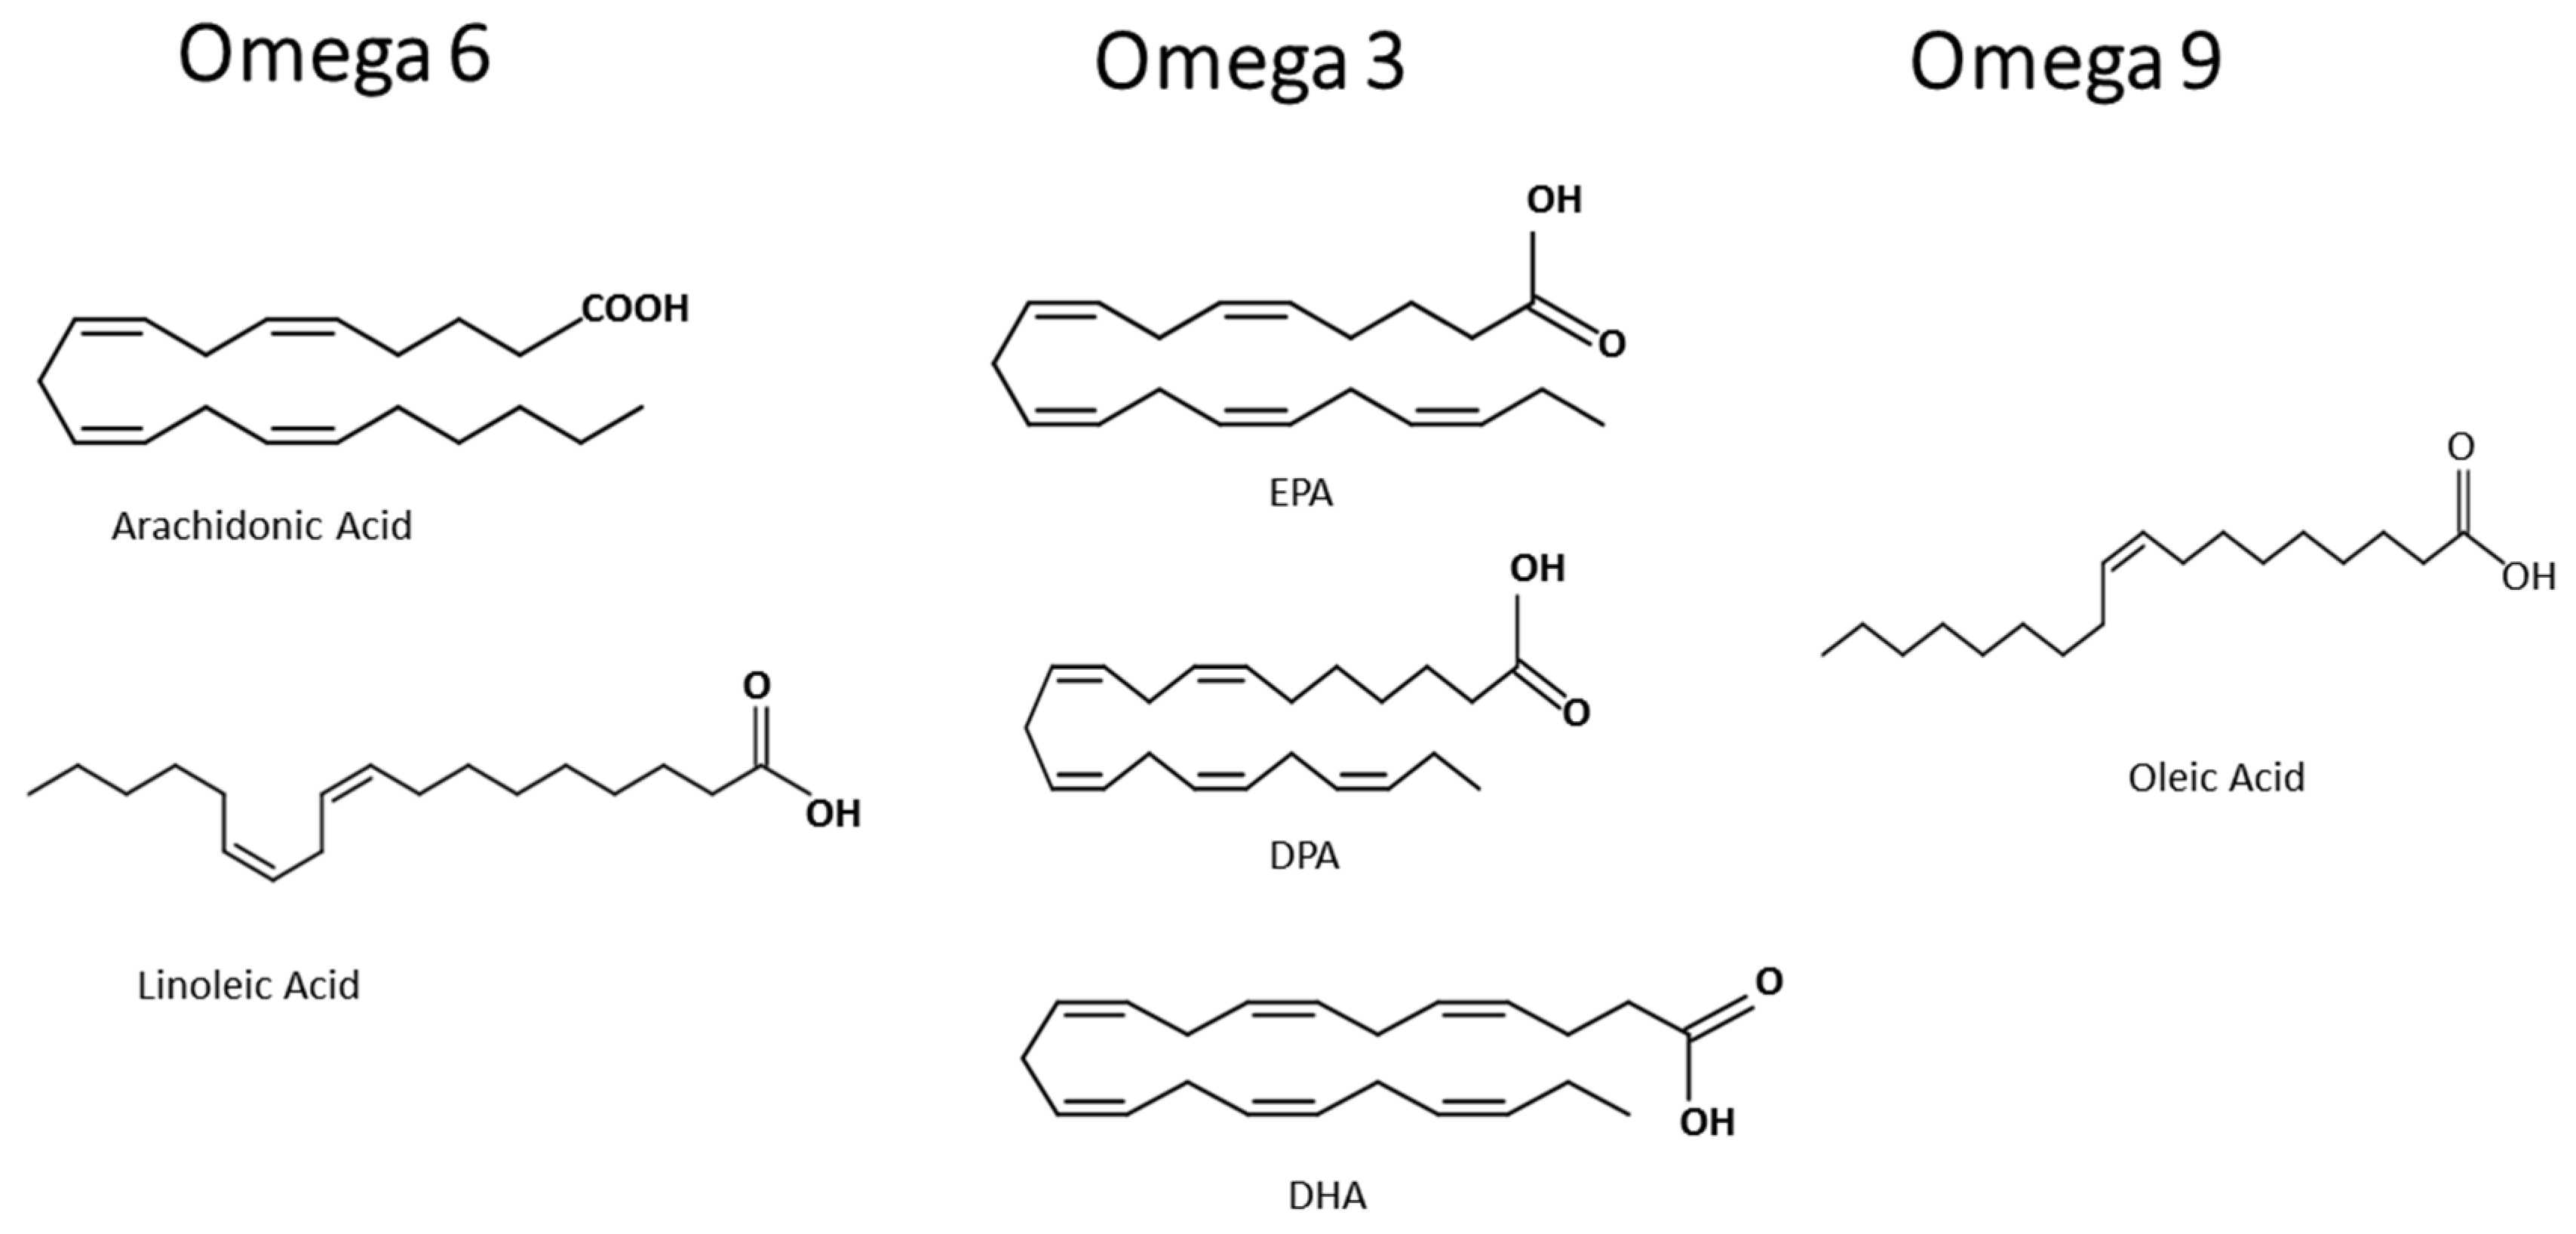 Three families of unsaturated fatty acids Image credit. 